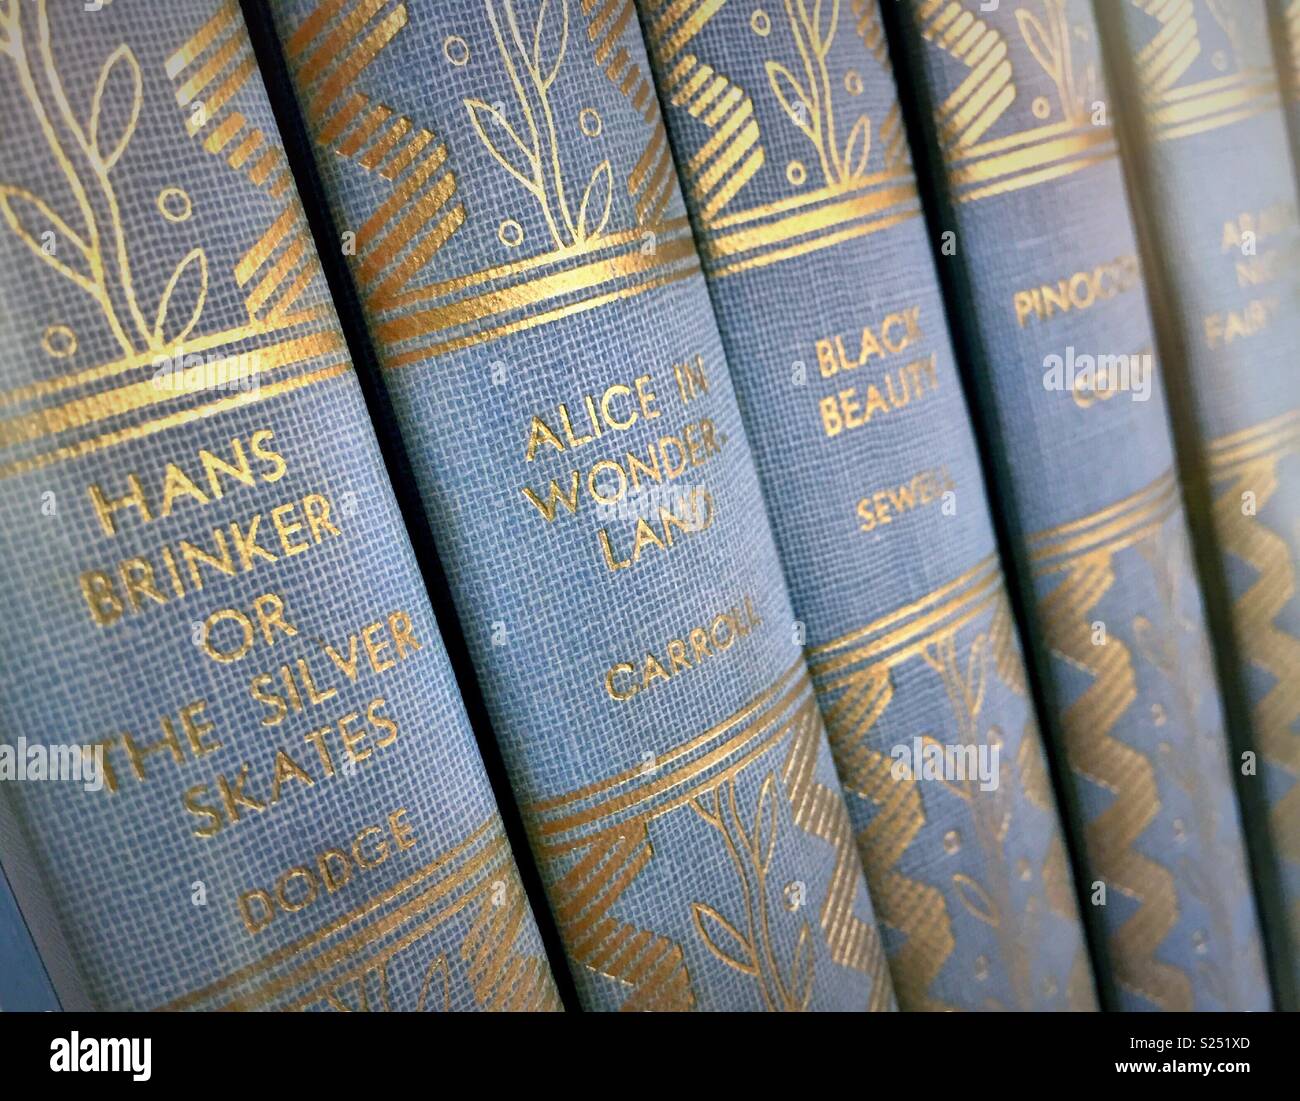 Close up of titles of a line of books on a shelf, USA Stock Photo